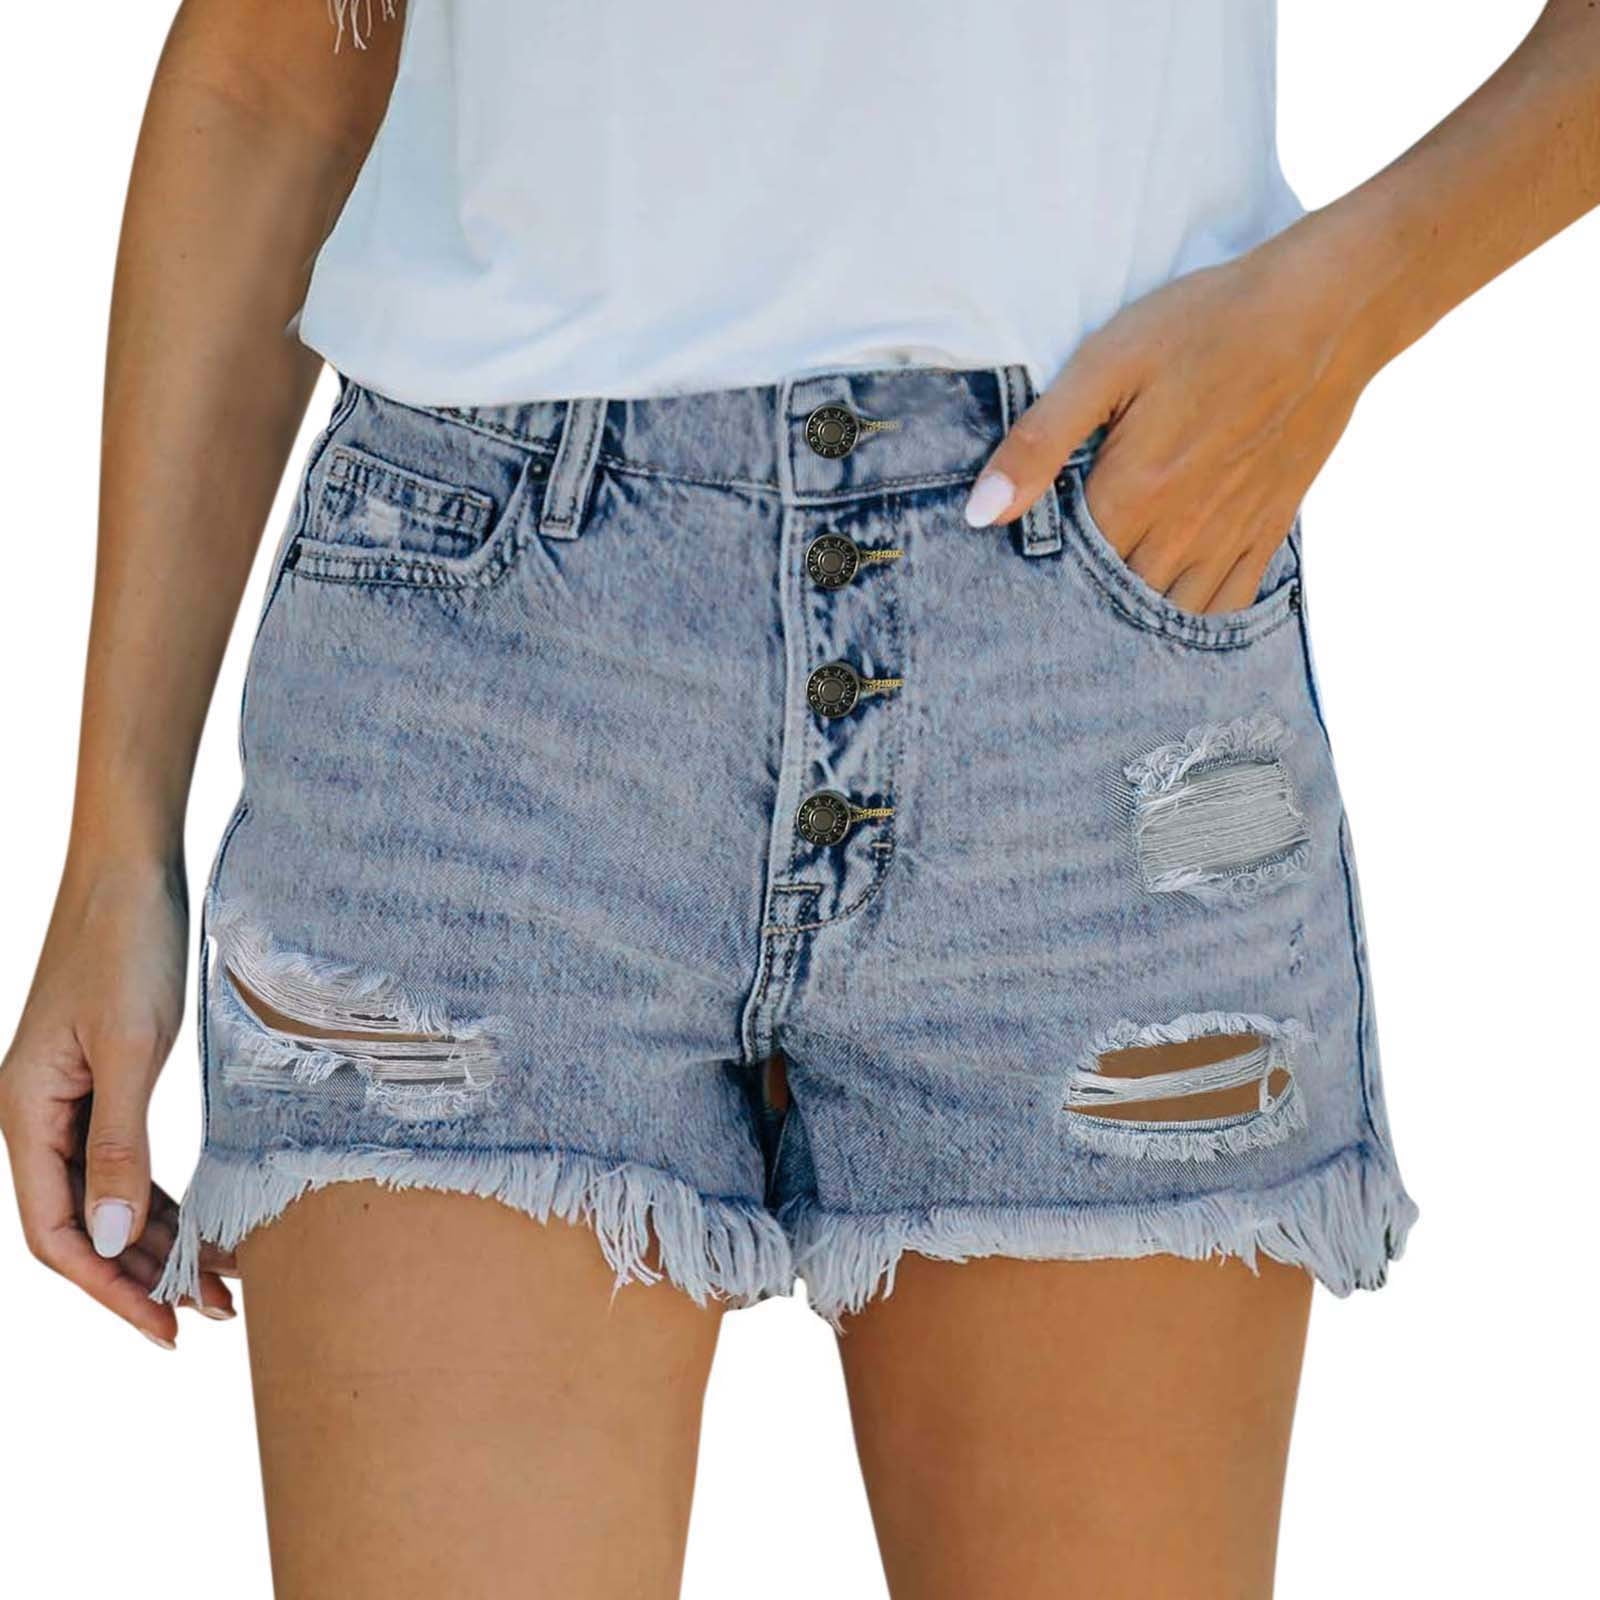 Larisalt Jean Shorts Womens ,Womens High Waist Ripped Hole Washed  Distressed Short Jeans Blue,XL